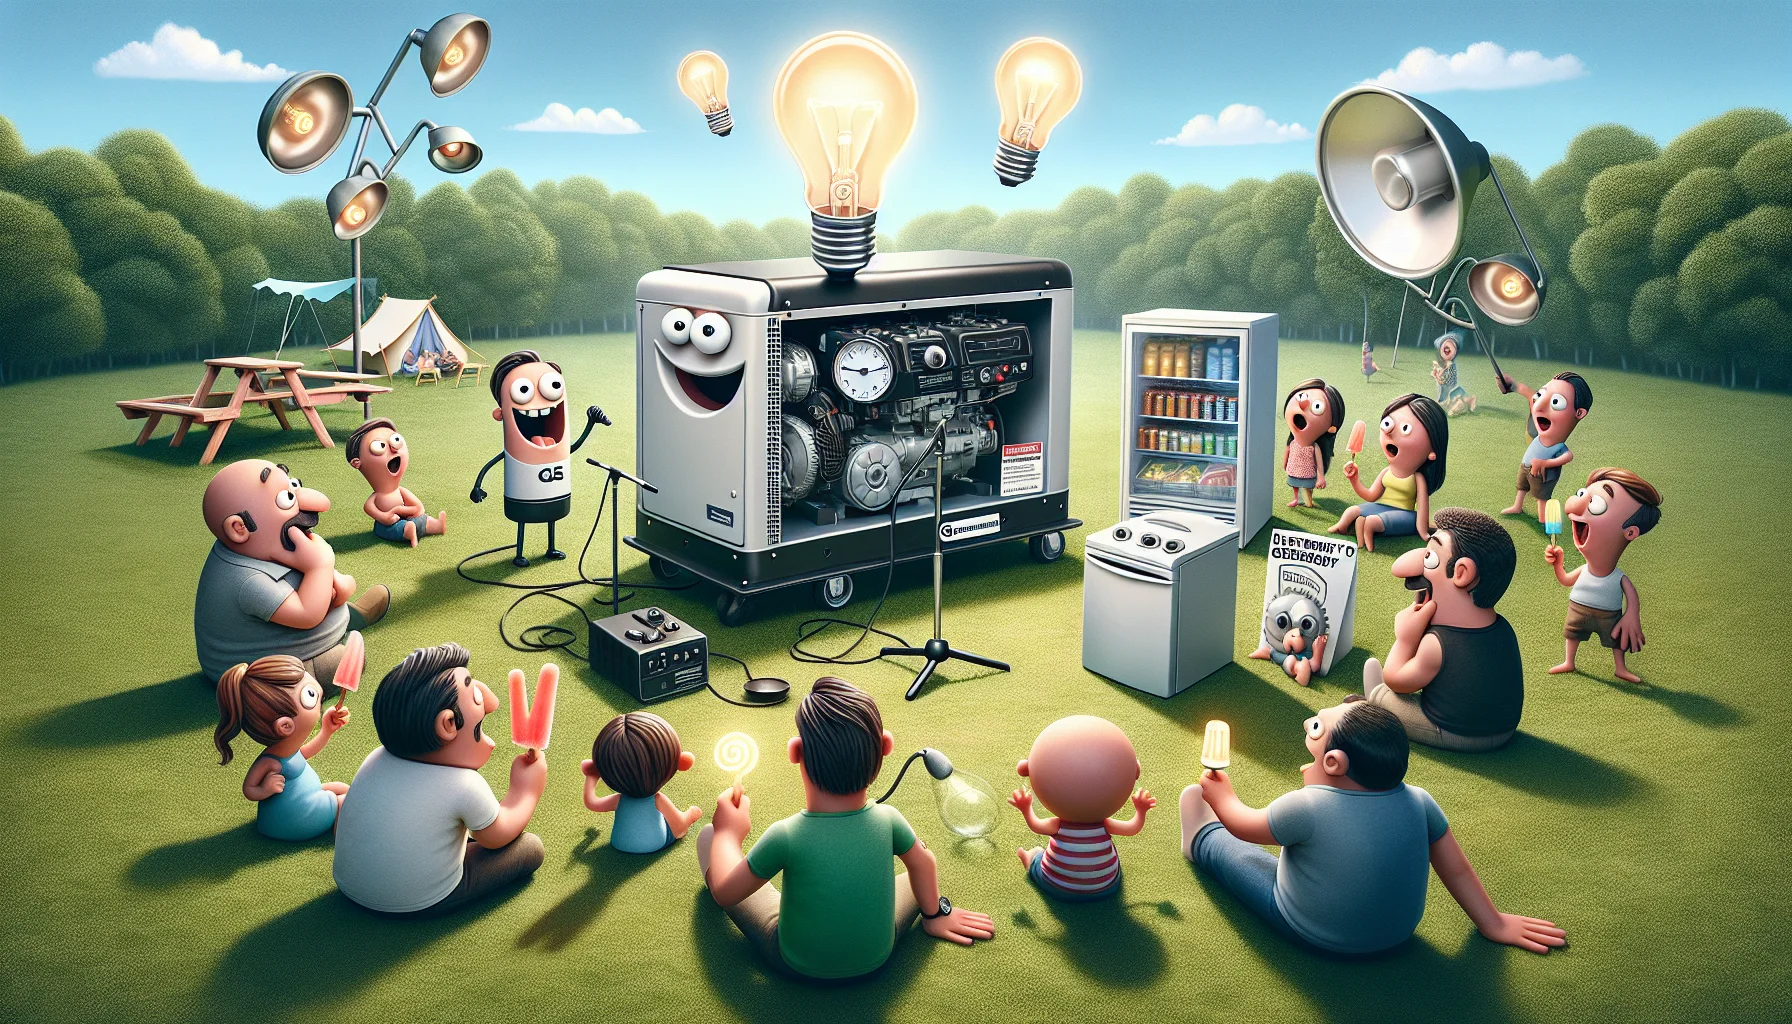 Create a humorous scene that promotes the use of electricity generation equipment. Picture a backdrop of an outdoor family picnic in a sunny park with lush greenery. A group of five generators are anthropomorphized as cartoon characters with googly eyes and wide grins. The largest one, a trustworthy figure, is speaking, using a singular lightbulb as a microphone, to a surprised but listening audience of diverse people. A small generator is performing a juggling act with light bulbs, while another is powering a mini fridge, out of which a fourth generator is sneakily stealing a popsicle. The smallest generator of all is blowing bubbles that light up like tiny lamps. The overarching message is of reliability, energy, and light-hearted amusement.